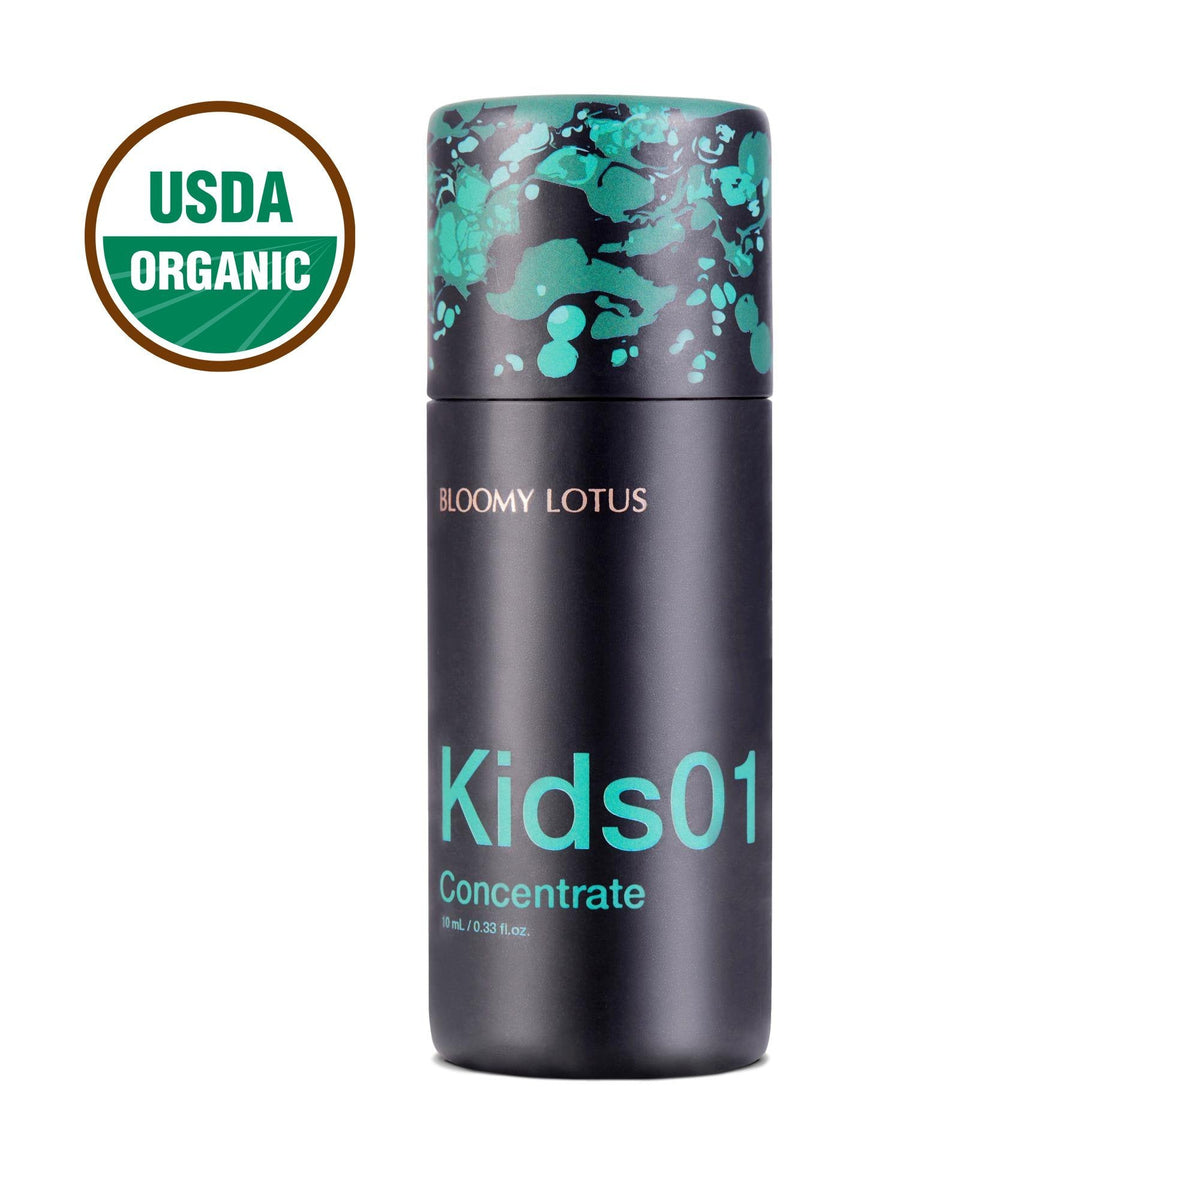 Aromatherapy Bloomy Lotus Kids01 Concentration Essential Oil, 10 ml